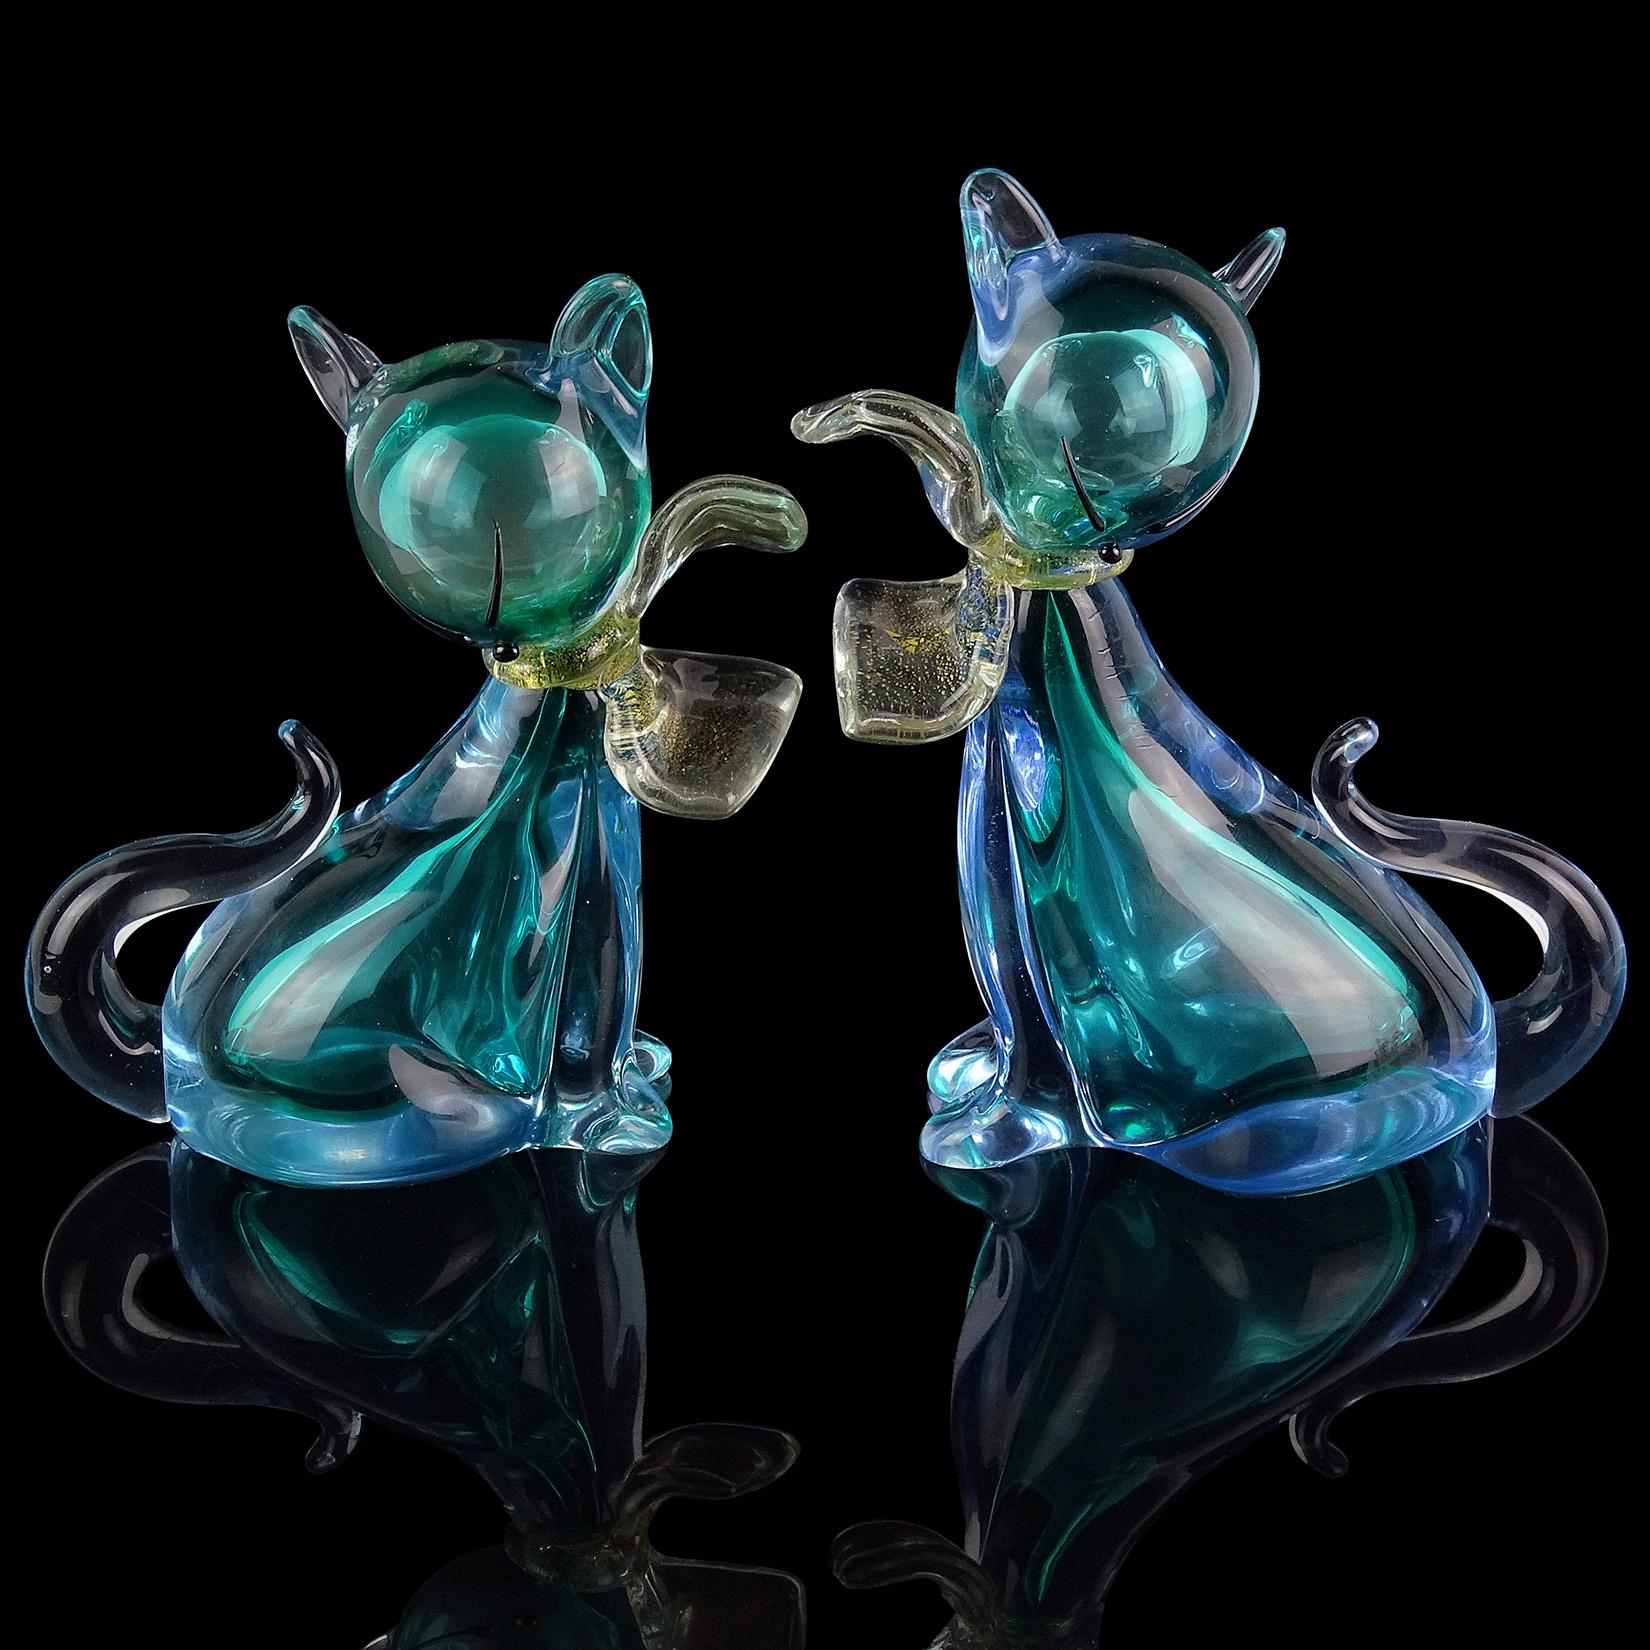 Beautiful Murano handblown Sommerso aqua blue and gold flecks art glass kitty cat figurines. Documented to designer Alfredo Barbini. The matching pair have gold leaf bows around their necks. Very elegant little kitties. Tallest measures 6 1/4